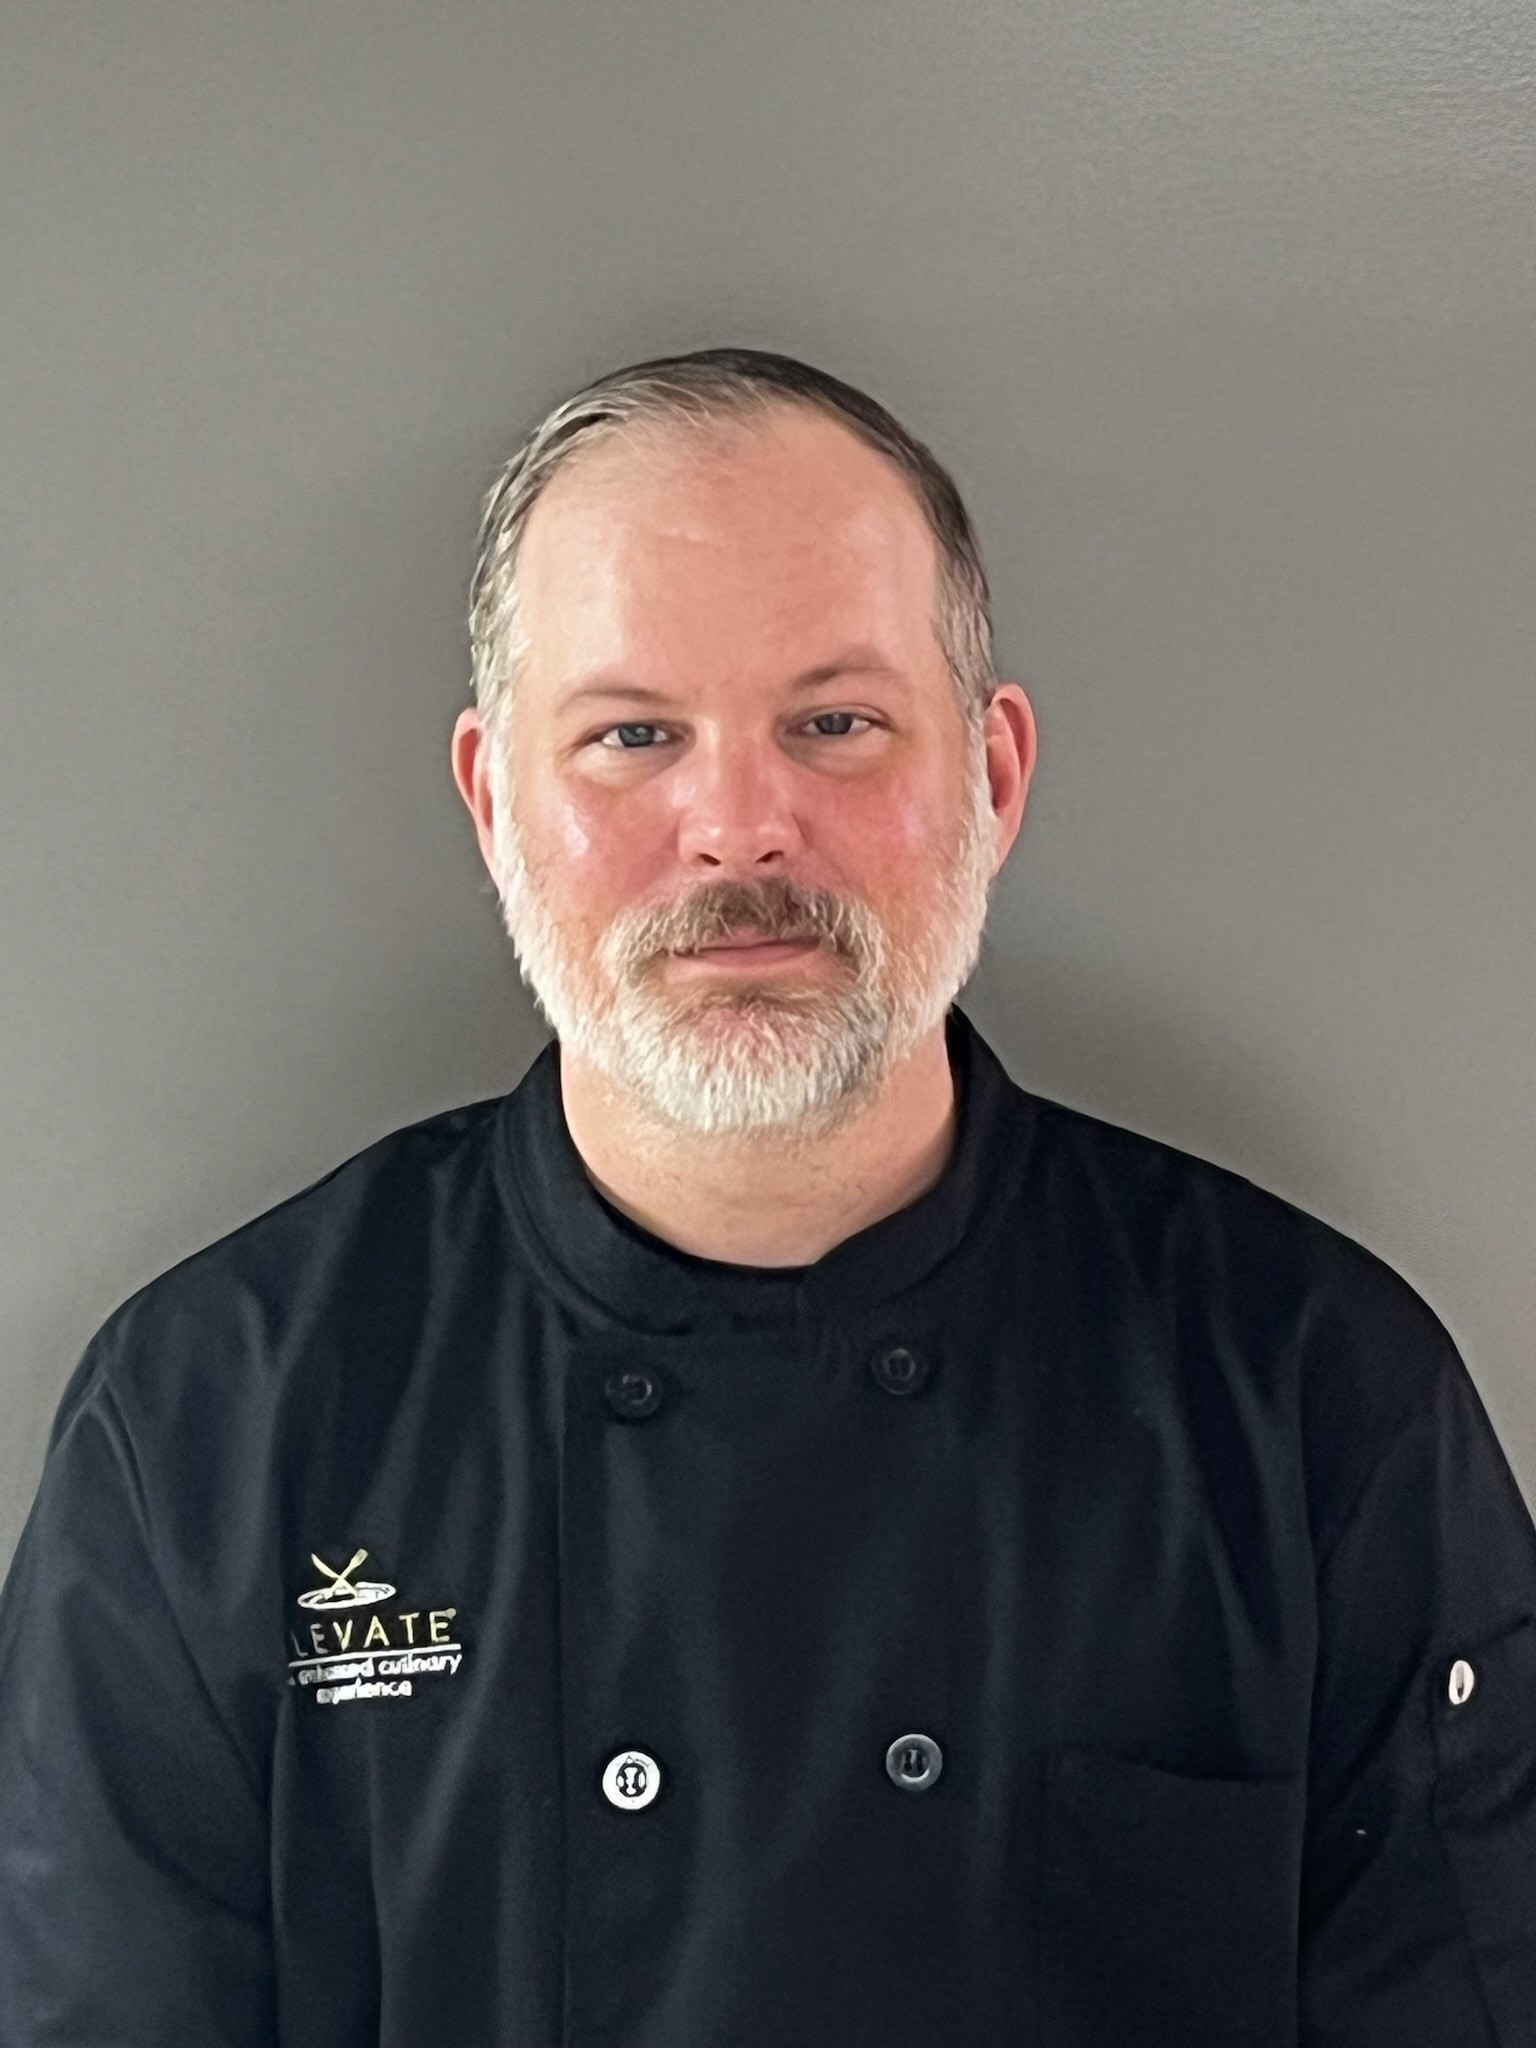 Stephen Batten, Culinary Services Director, Solstice at Plano